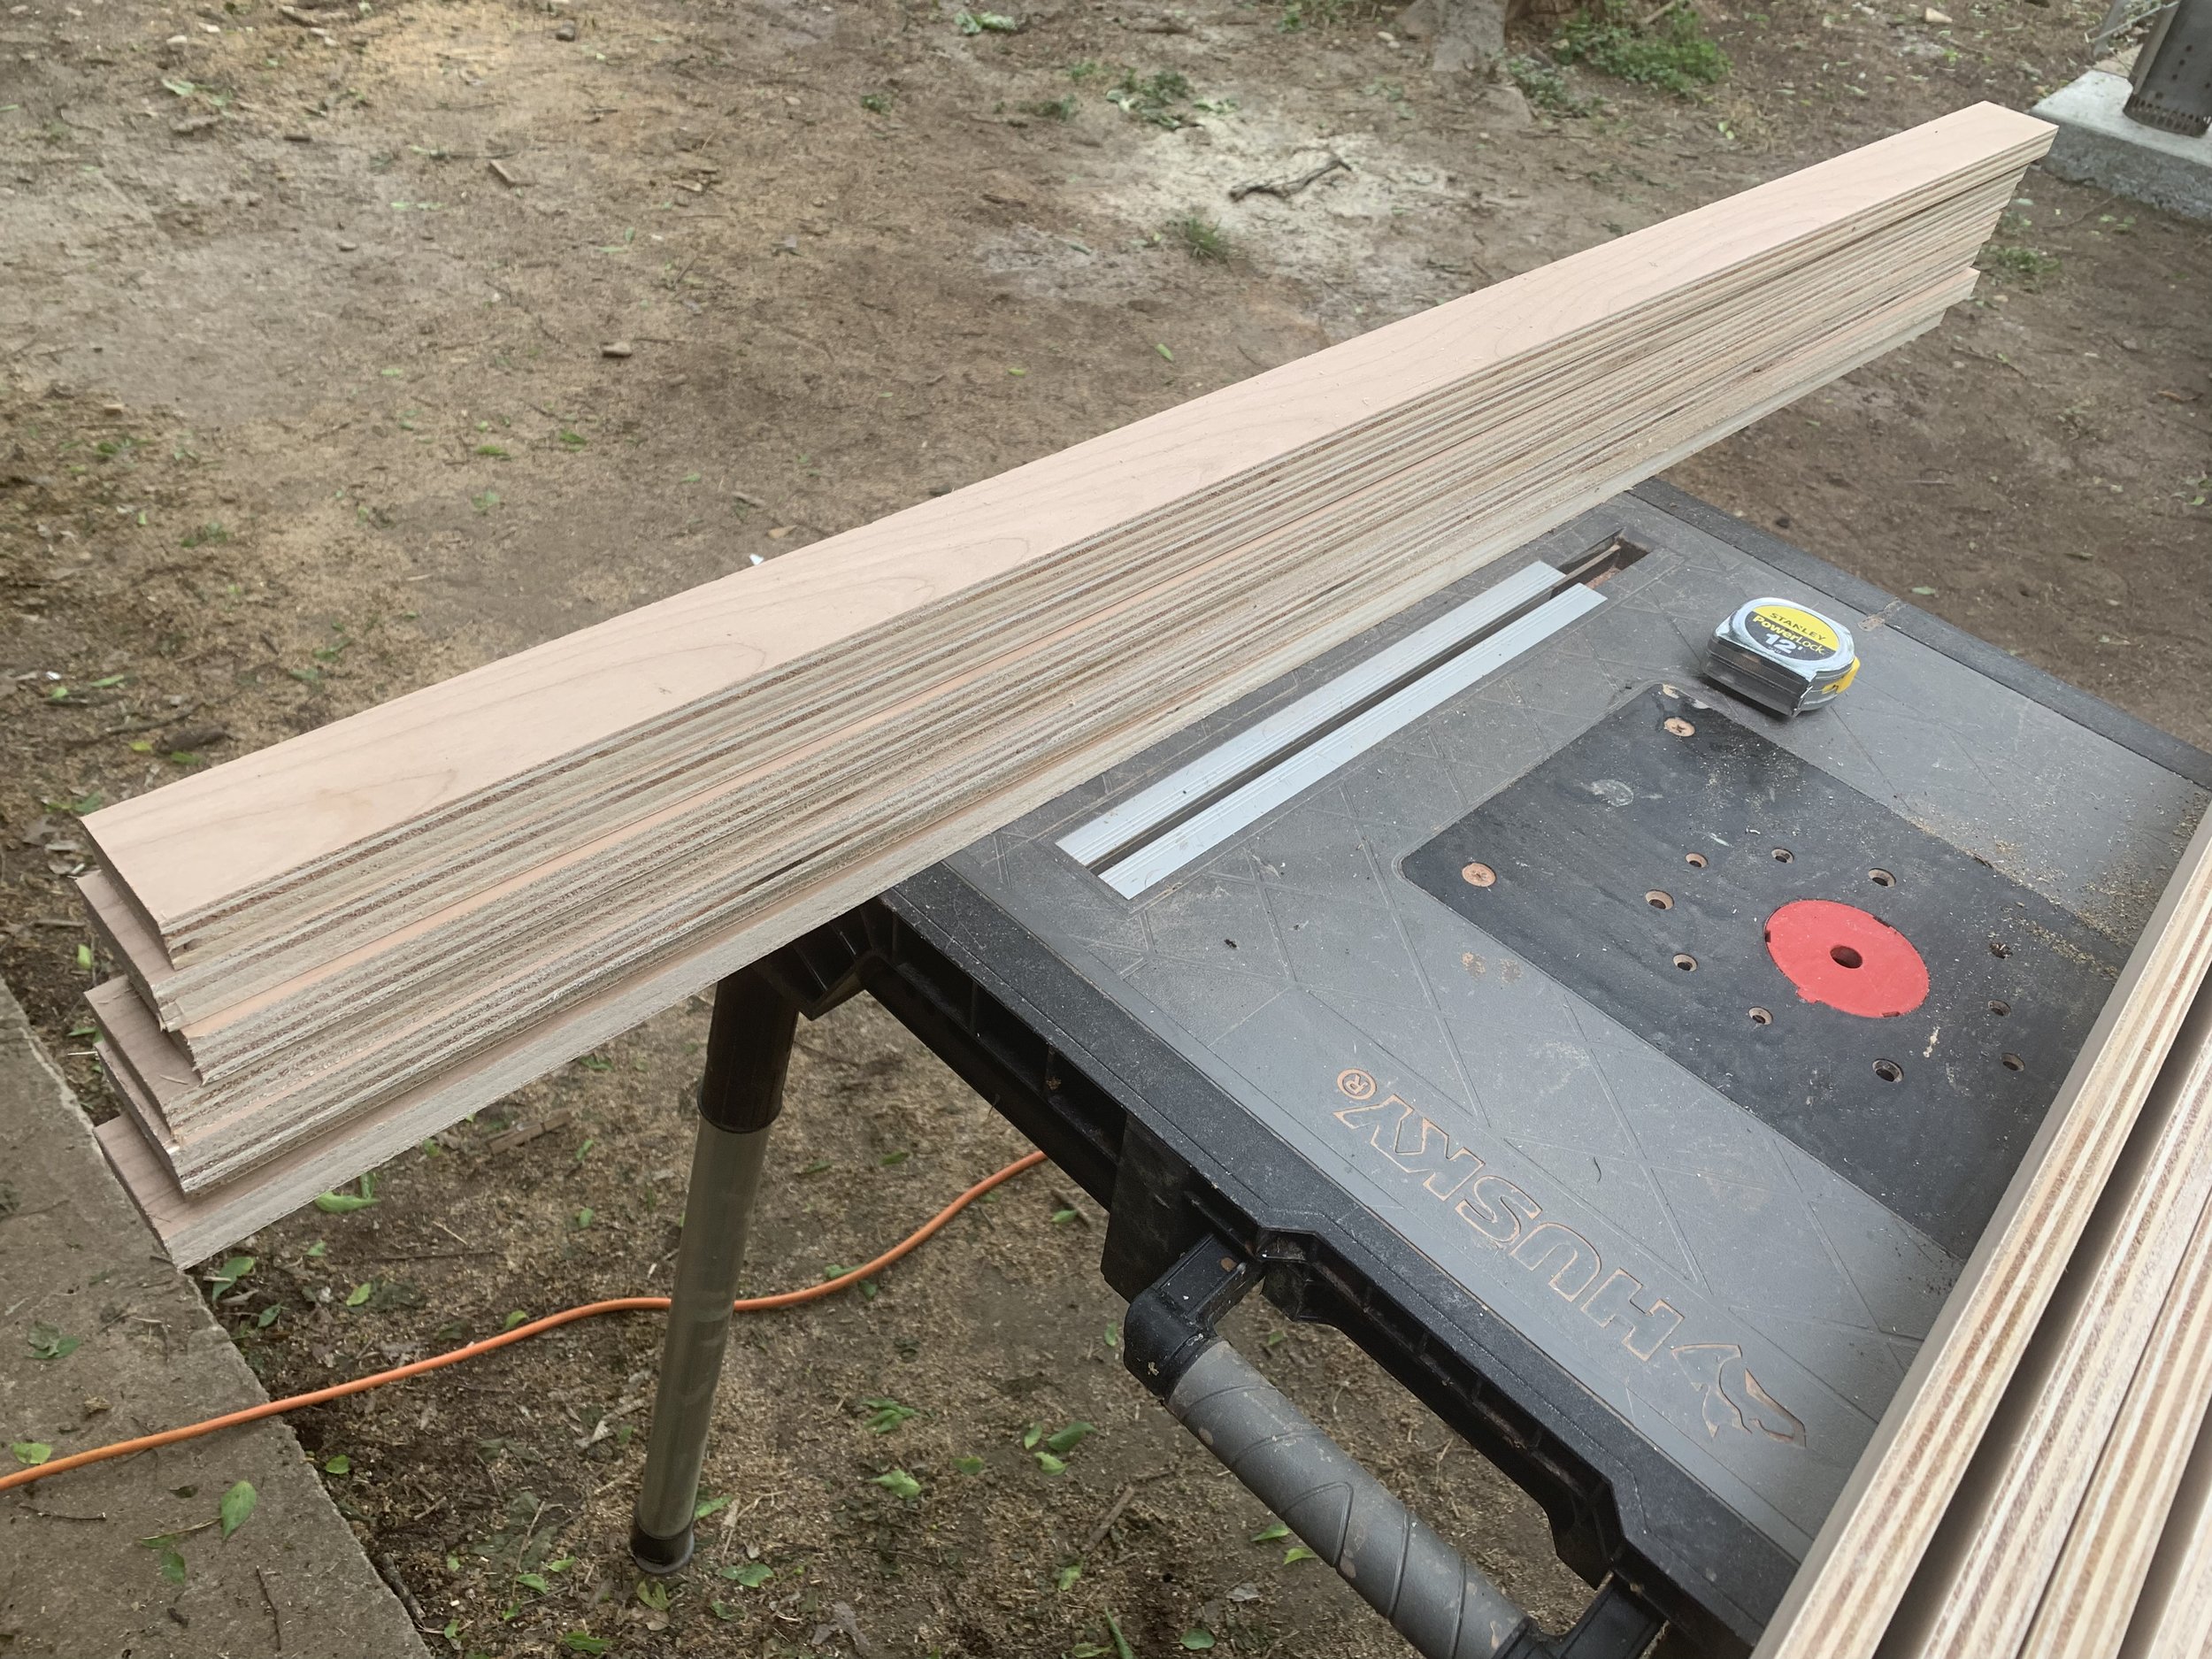  Our next job was to cut the well pieces exactly to fit. One edge was the factory edge, and the other was our rough. We had to line them all up with the factory edge to get a perfectly straight line. Then, we could get an exact cut on the mitre saw. 